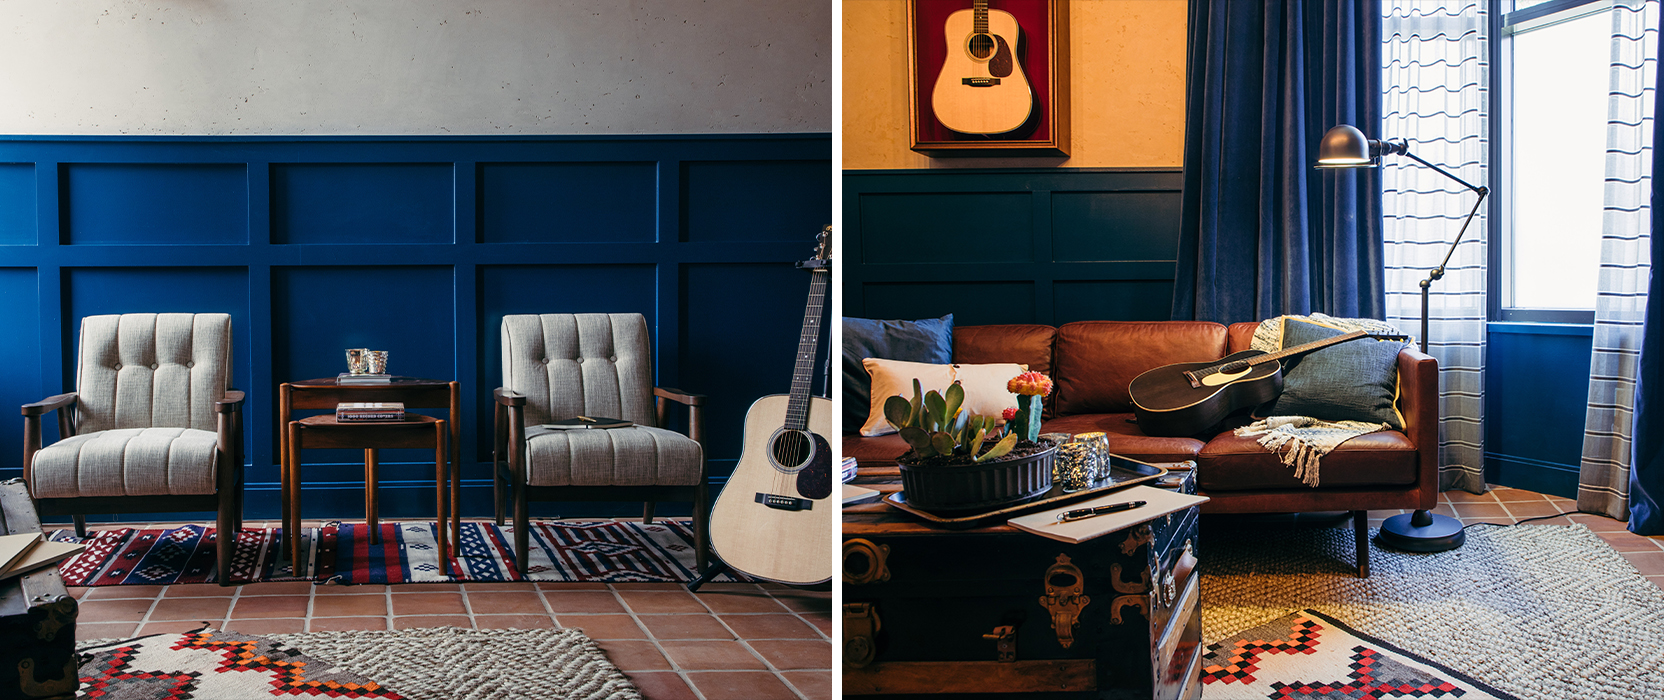 Left image: Two gray tufted chairs with wood frames and a shared accent table situated on woven rugs in front of a board-and-batten wall in a rich blue color, with an acoustic guitar on a stand off to the side.  Right image: Brown leather sofa with throw pillows, blanket and a black acoustic guitar arranged on top, industrial floor lamp and trunk used as a coffee table in foreground.